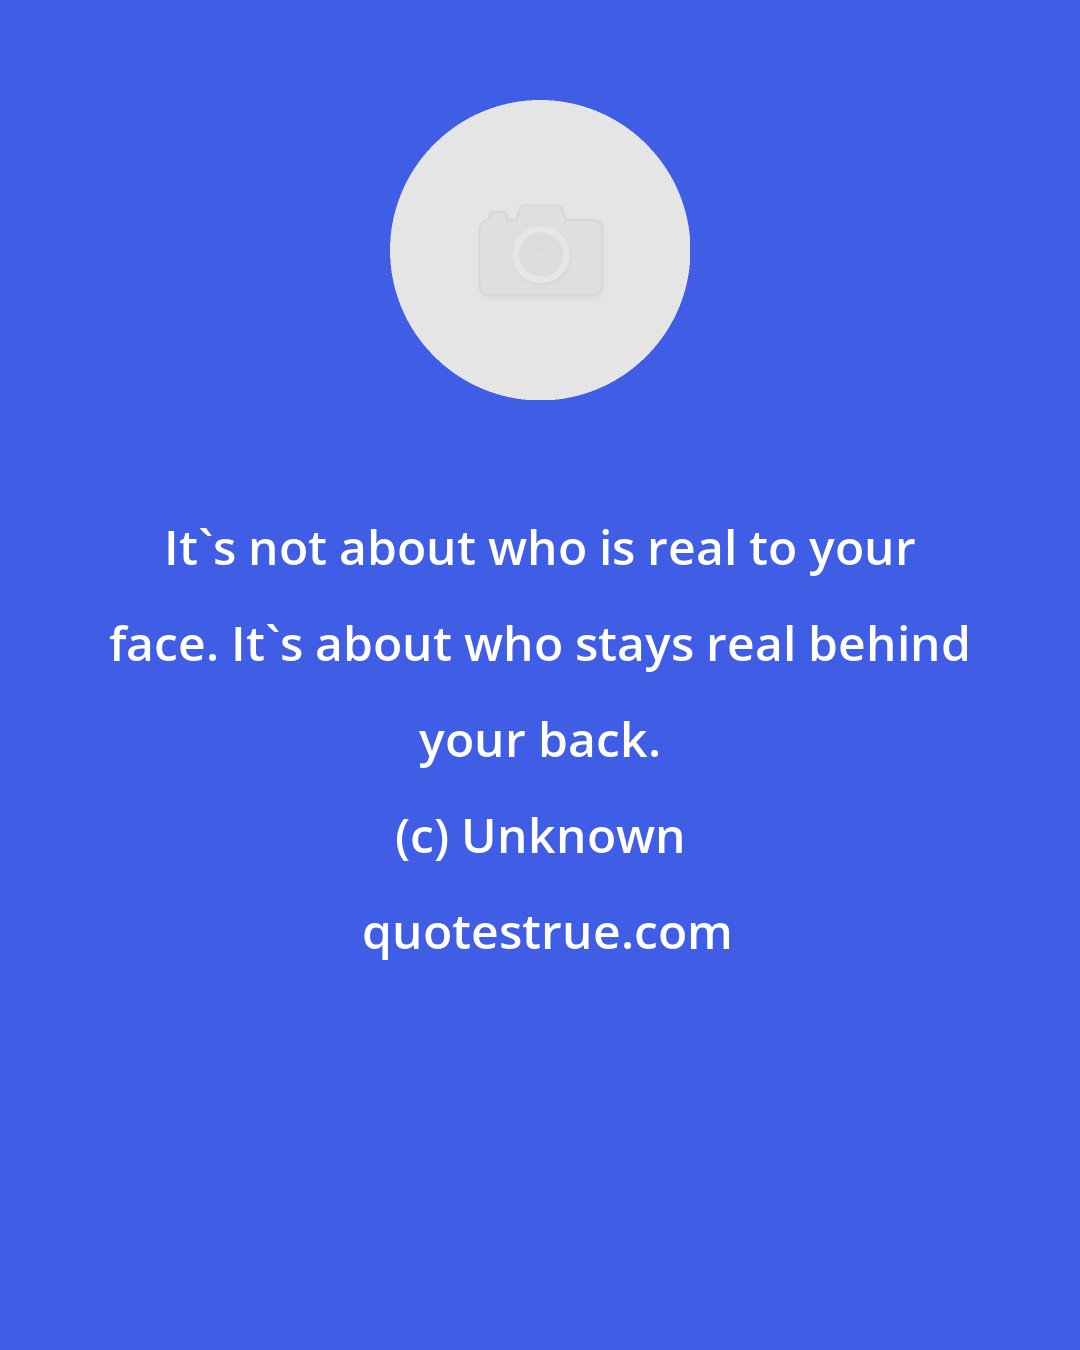 Unknown: It's not about who is real to your face. It's about who stays real behind your back.